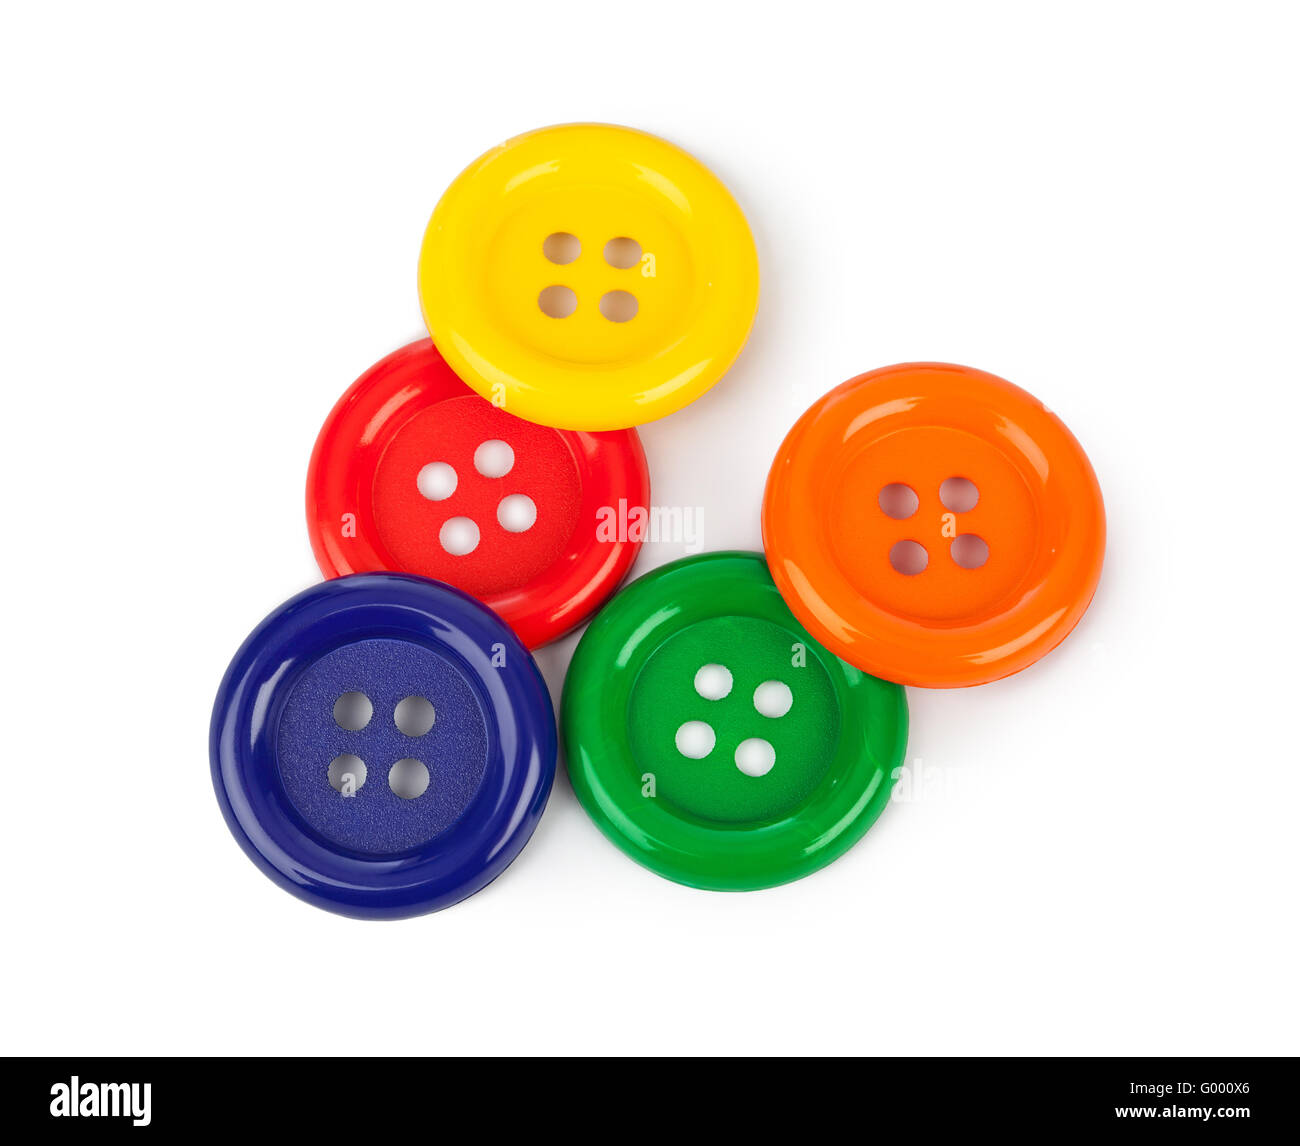 Multicolored buttons Stock Photo